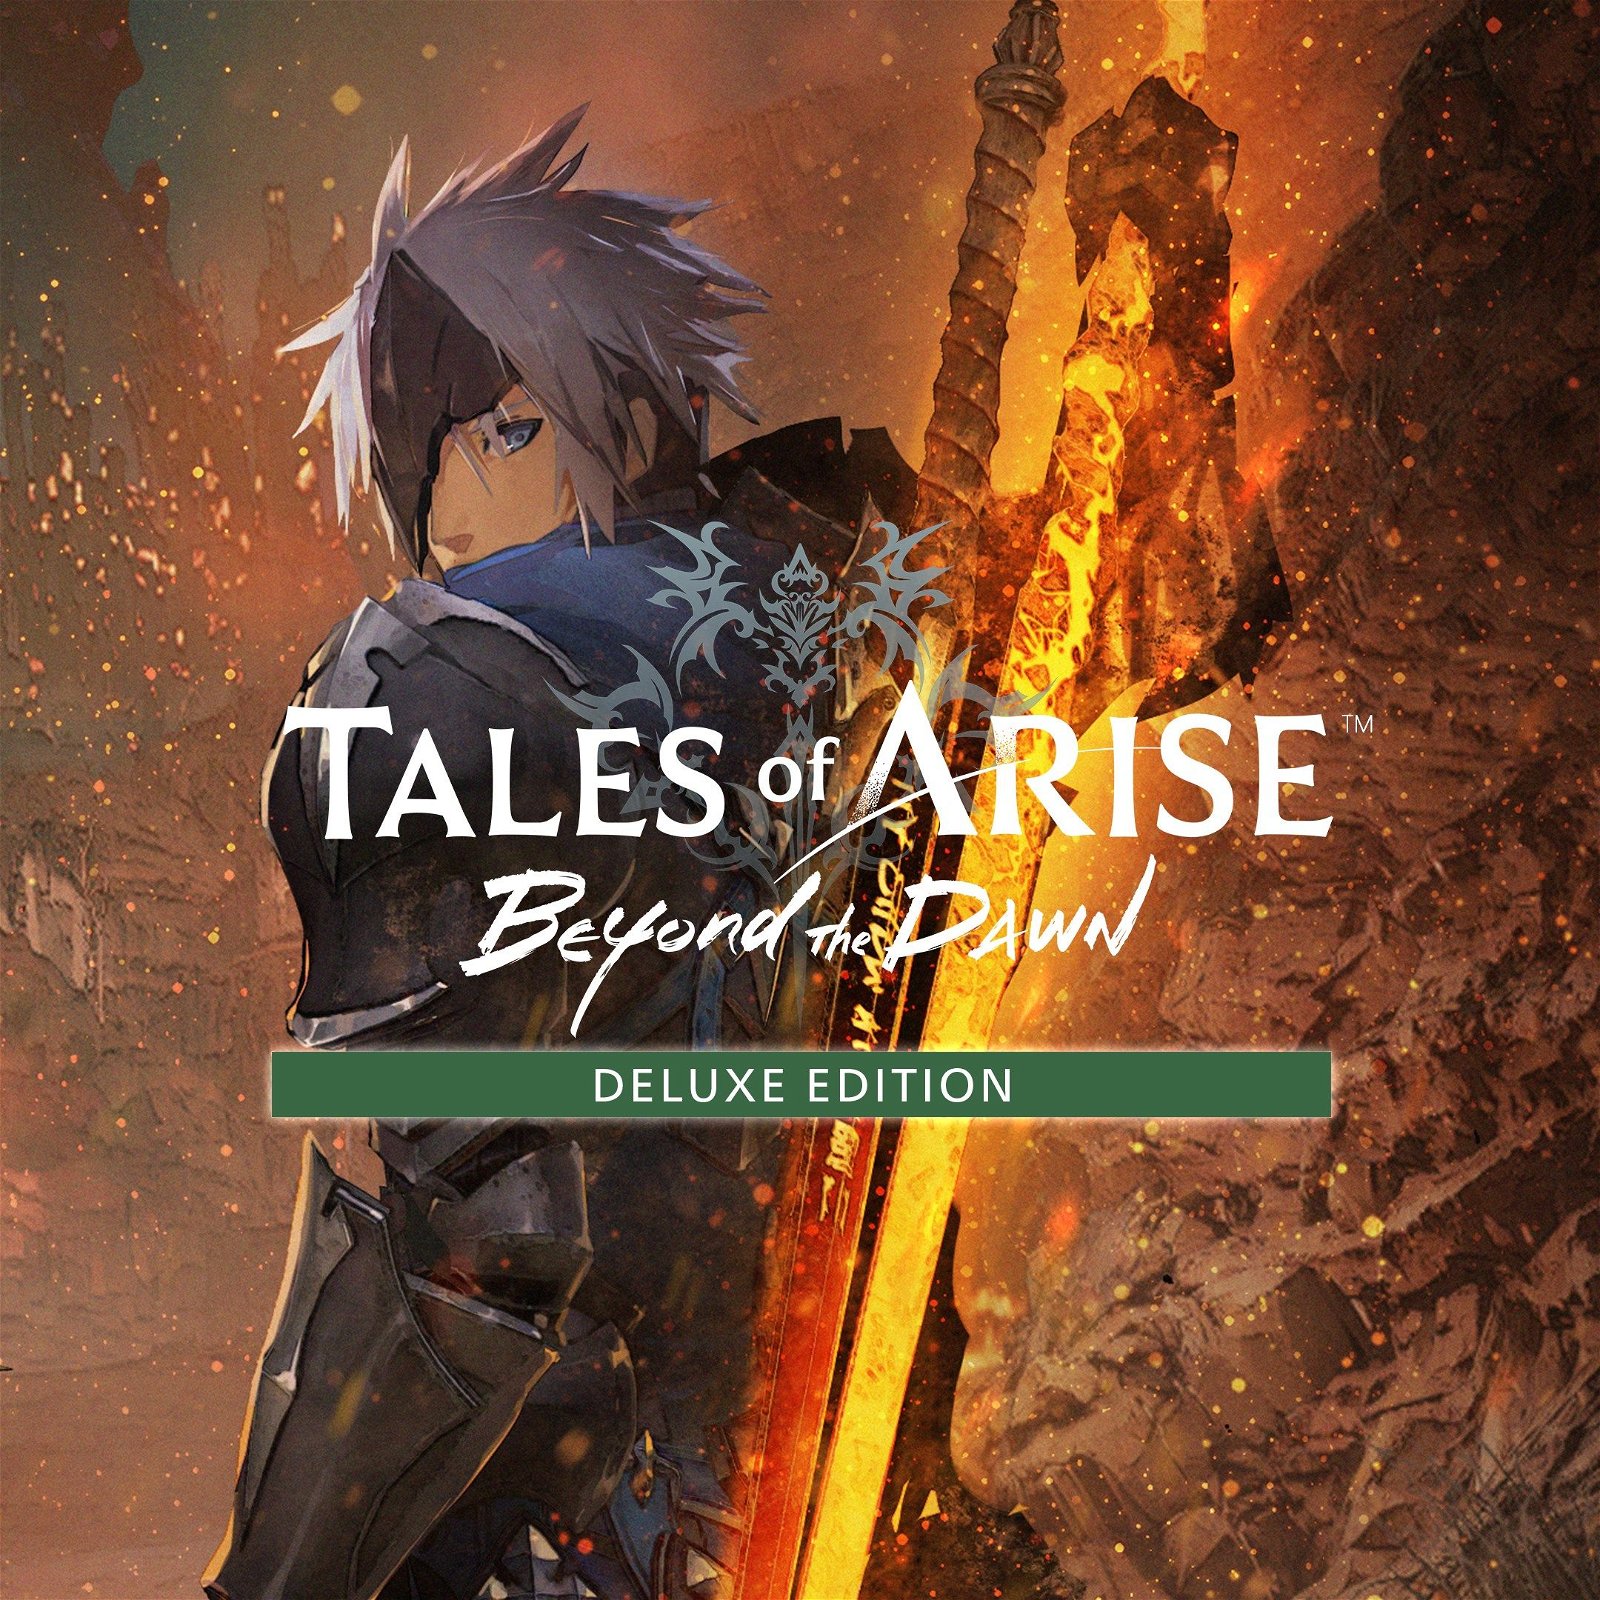 Image of Tales of Arise - Beyond the Dawn Deluxe Edition